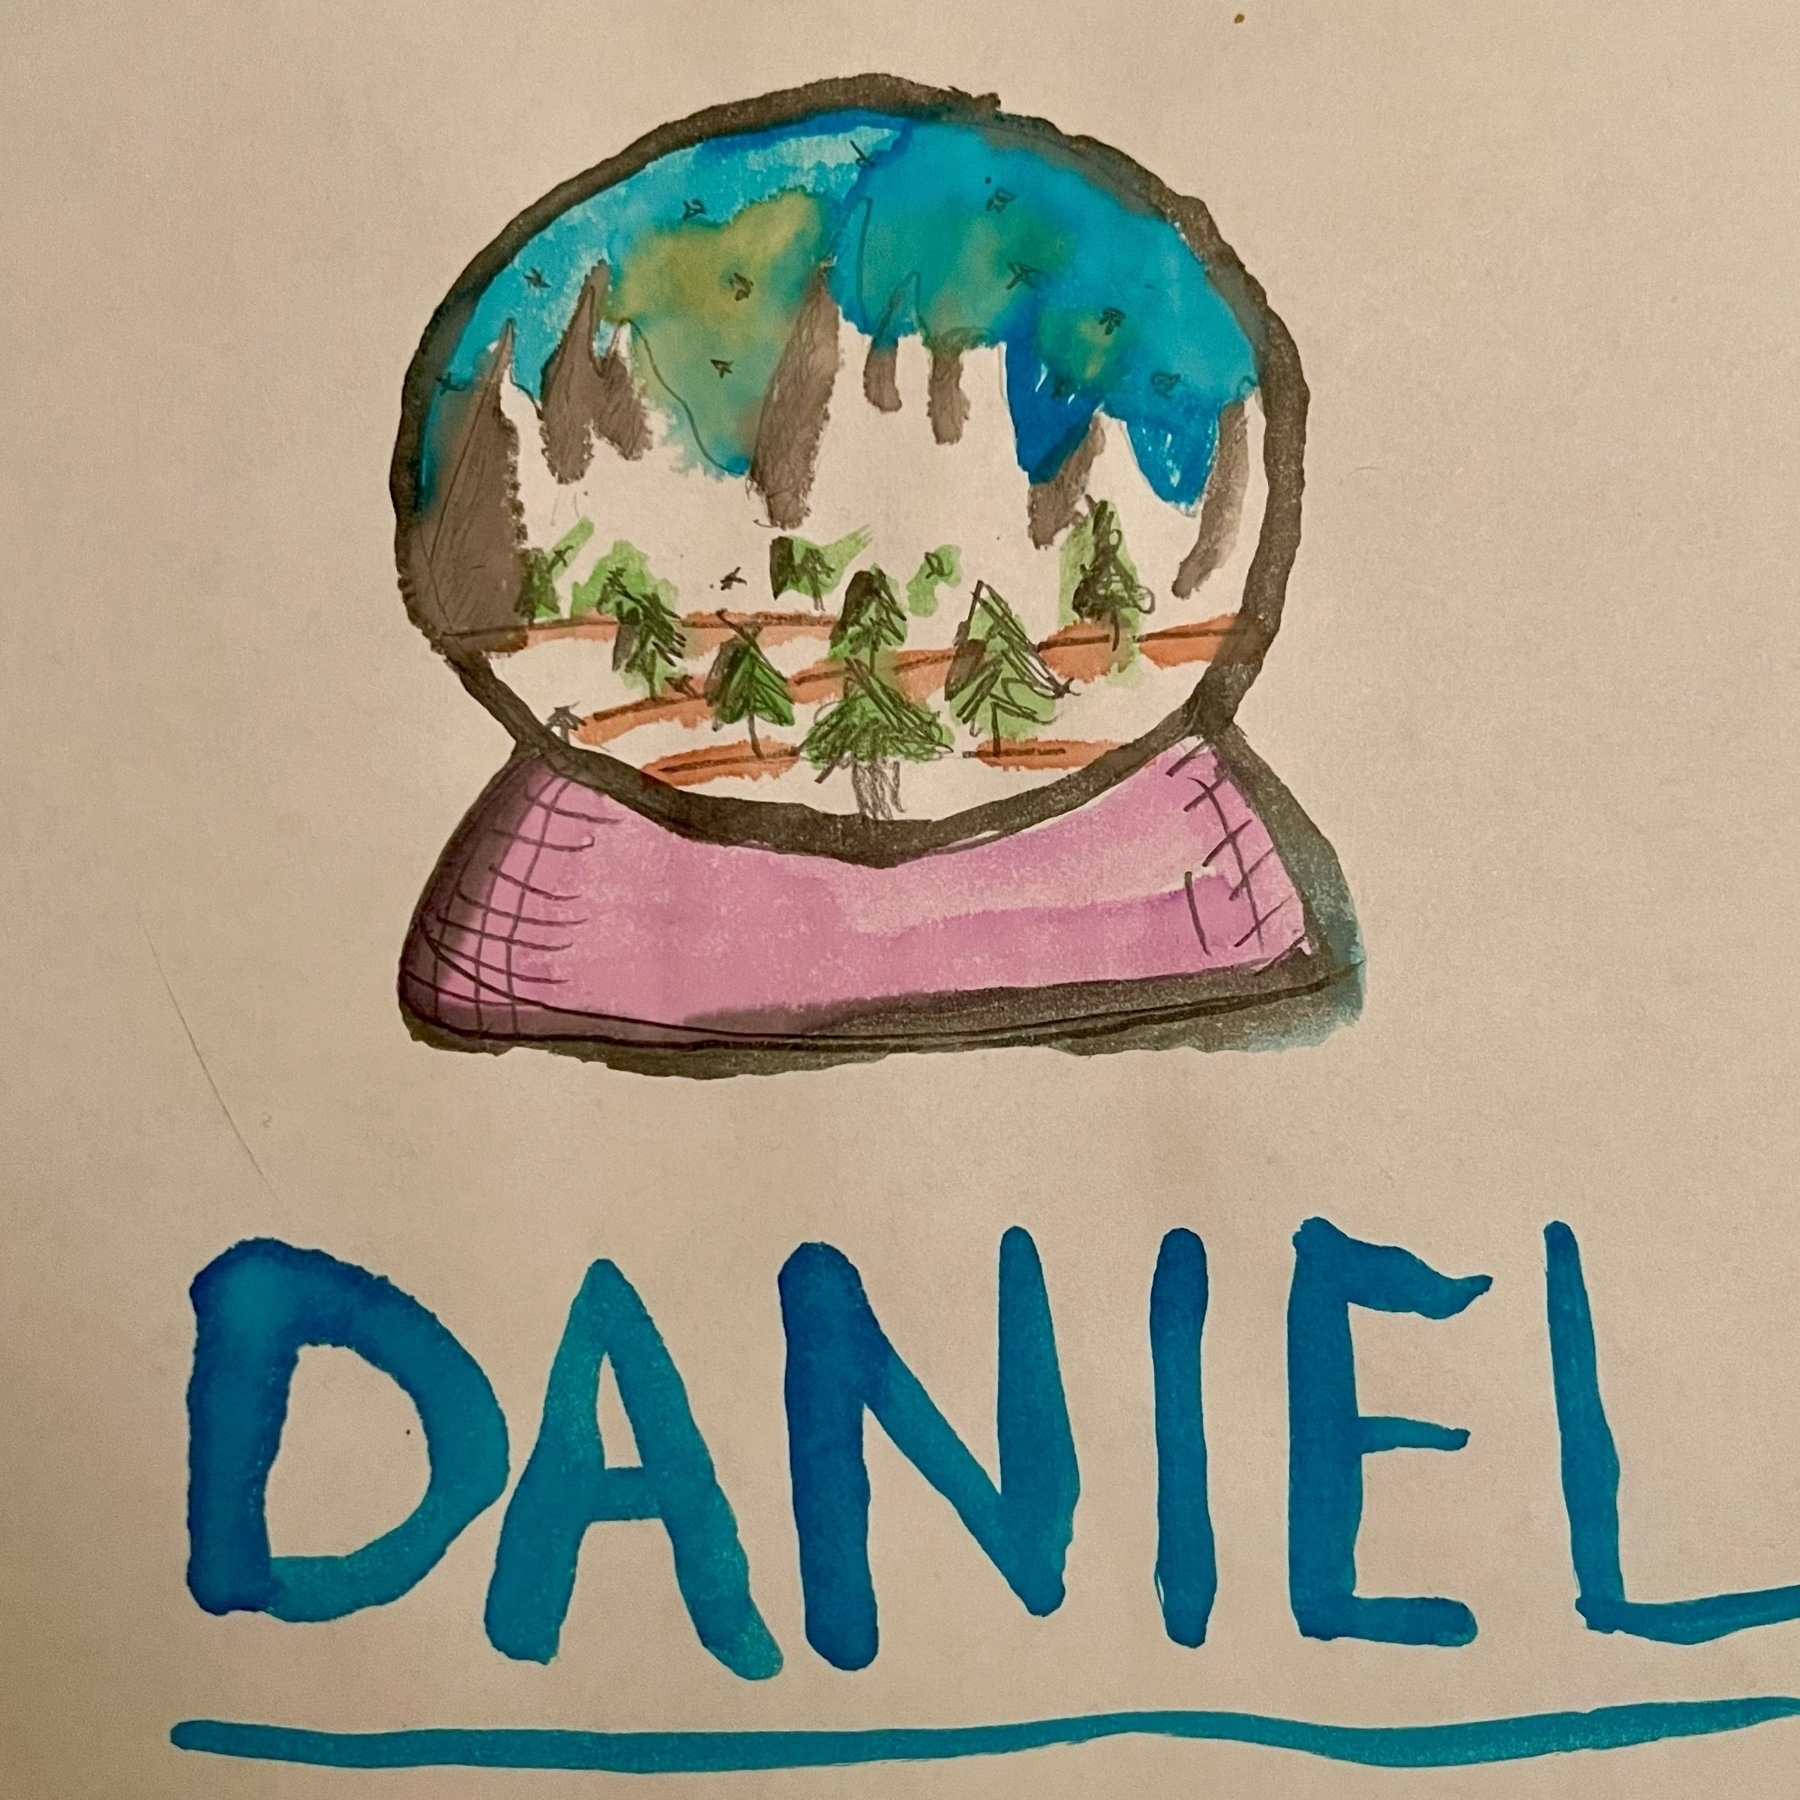 picture of a watercolor painting of a snow globe with signed name "DANIEL" below.